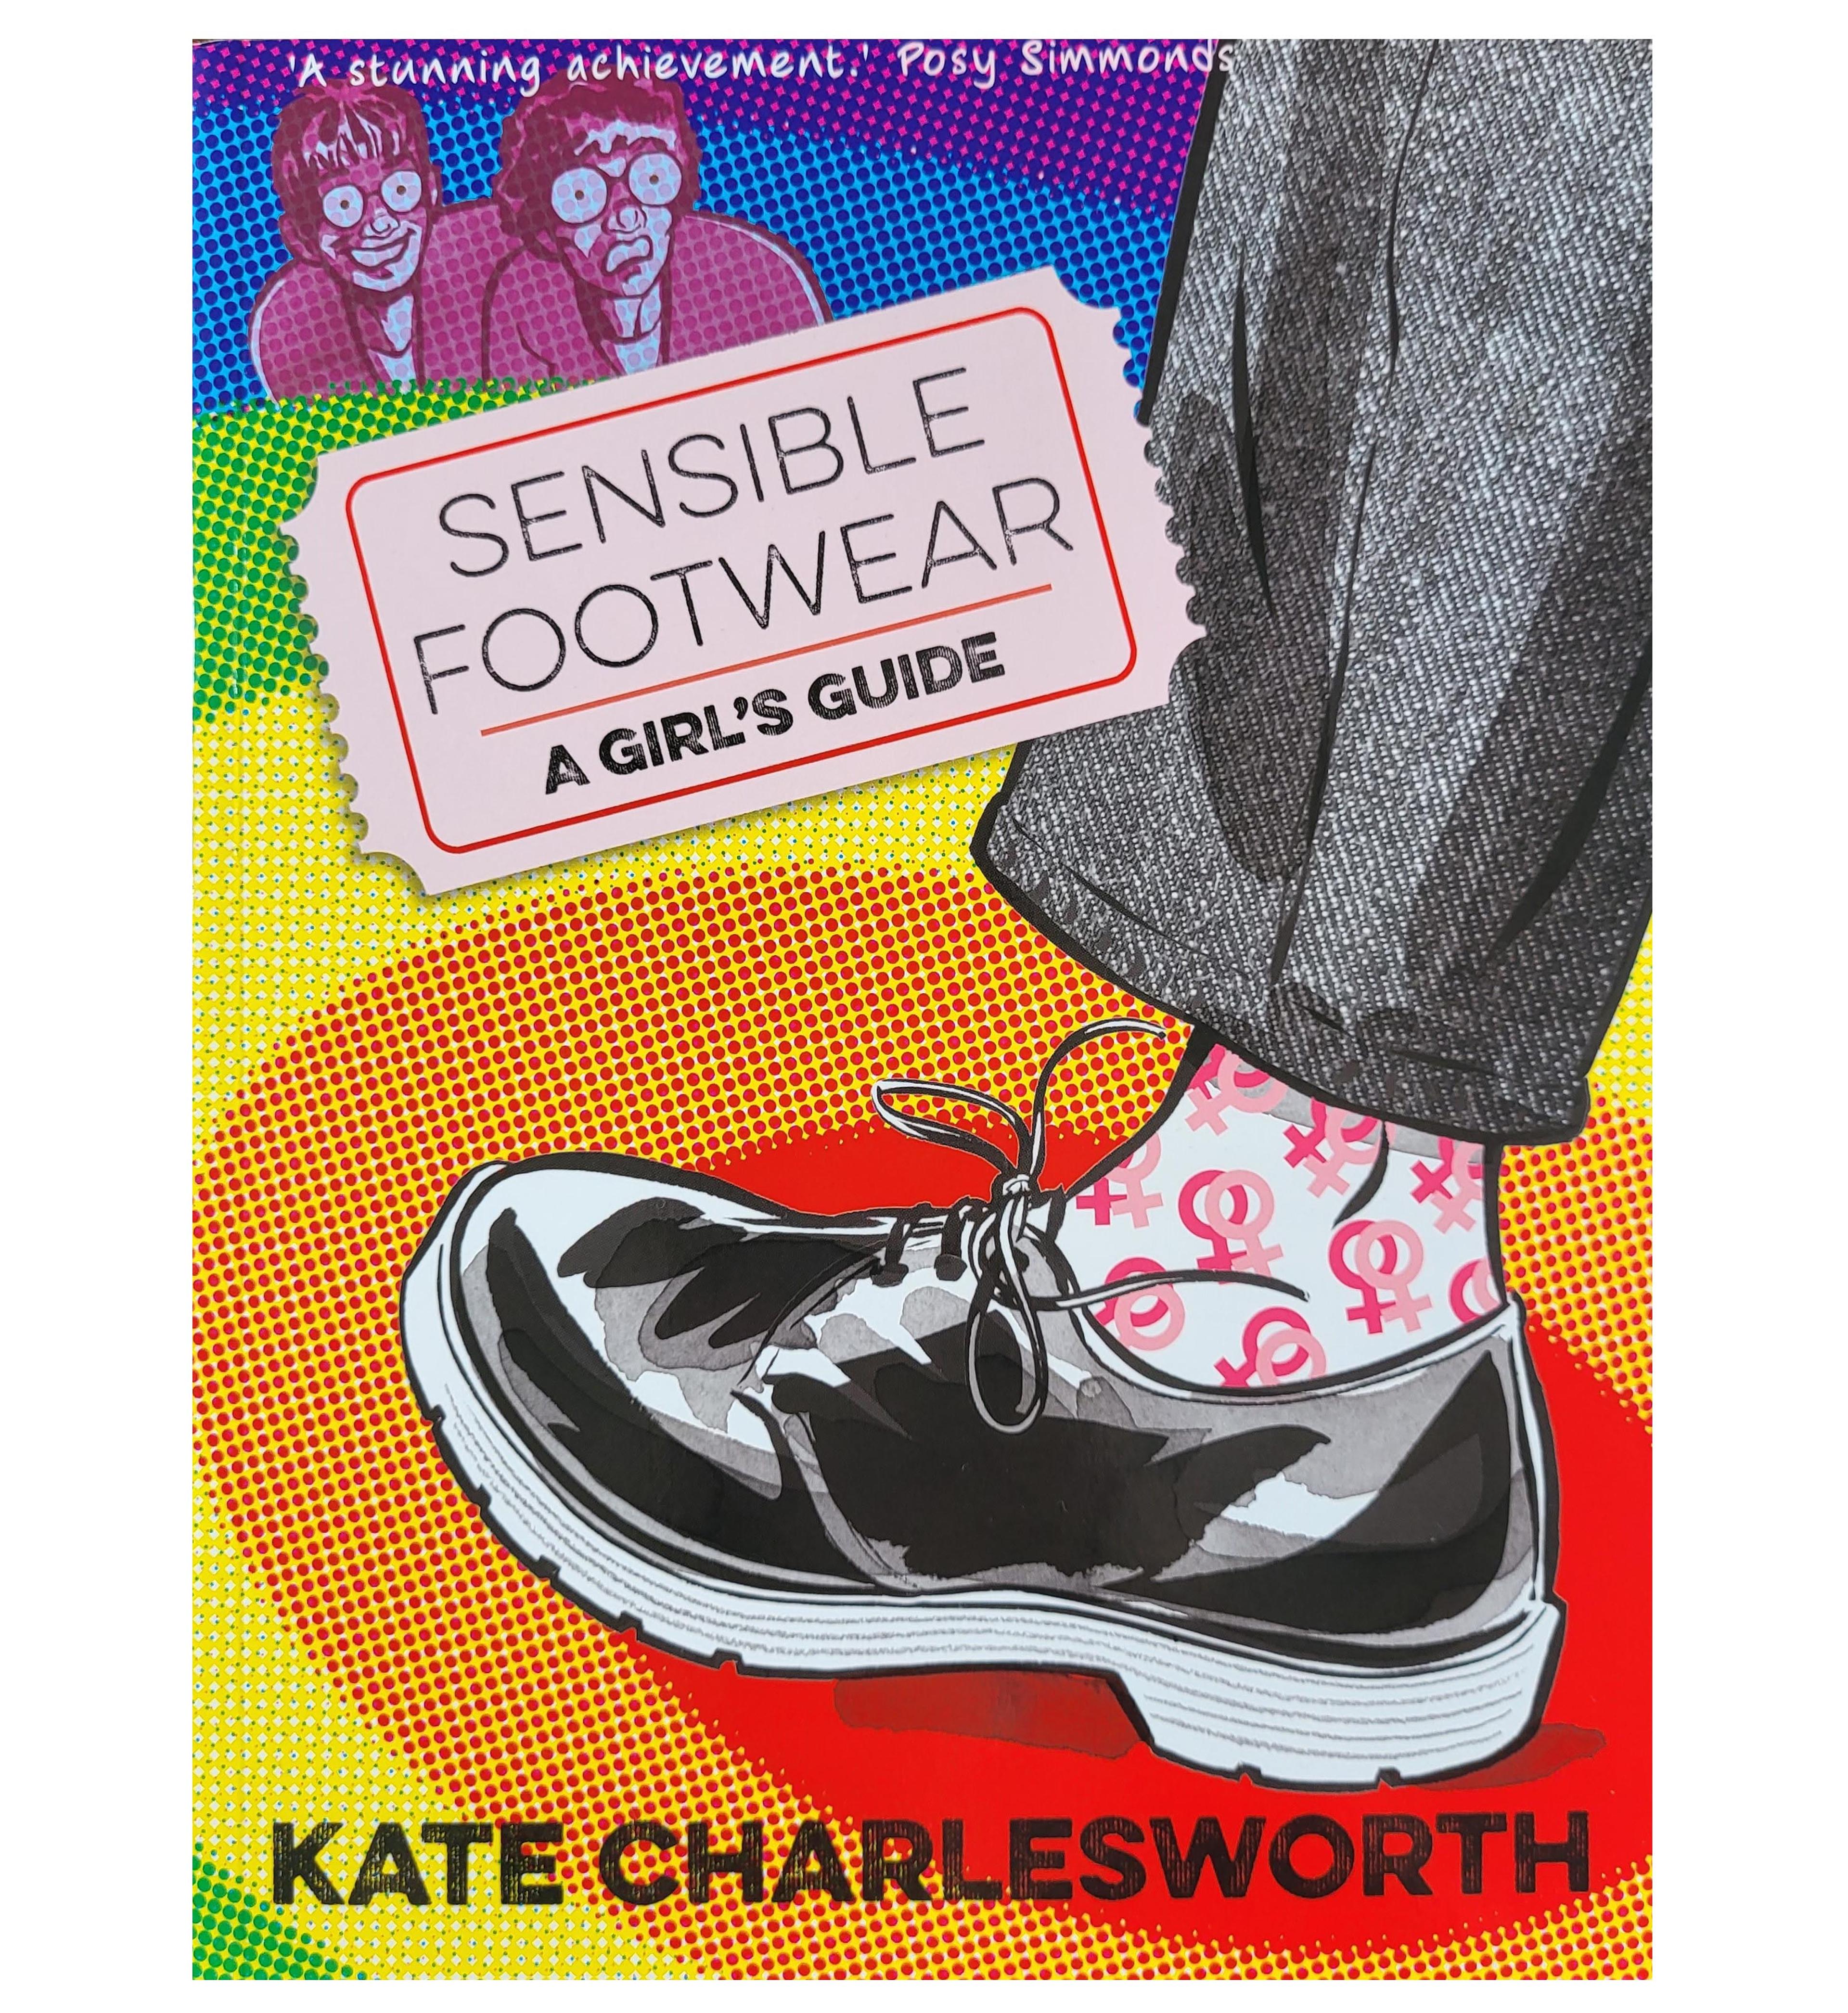 Front cover of the book, 'Sensible Footwear: A Girl's Guide' with the author's name 'Kate Charlesworth' at the bottom. At the top of the cover is a quote by Posy Simmonds, 'A stunning achievement.'.